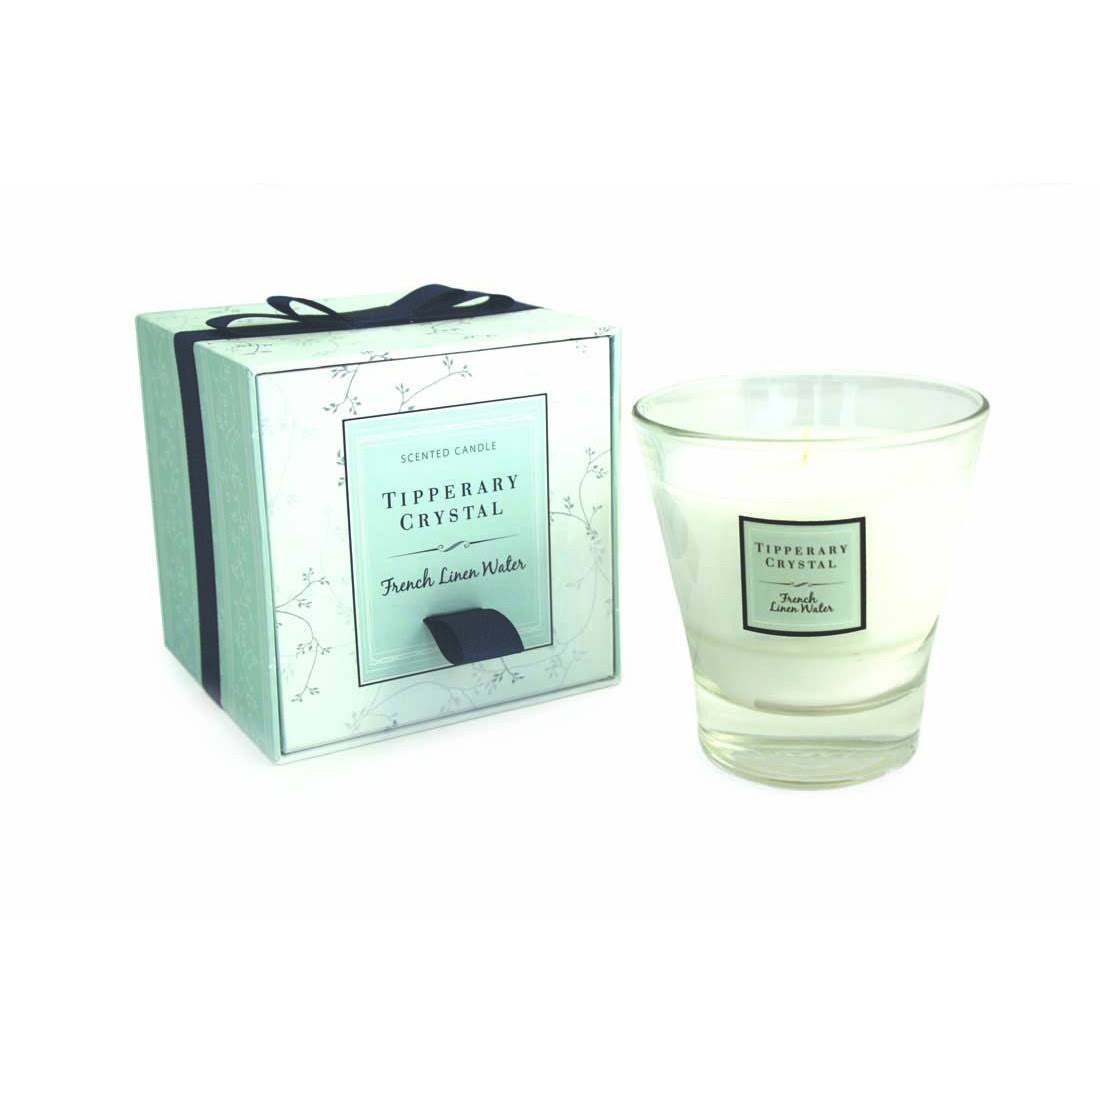 Tipperary Crystal Candle Filled Tumbler Glass - French Linen